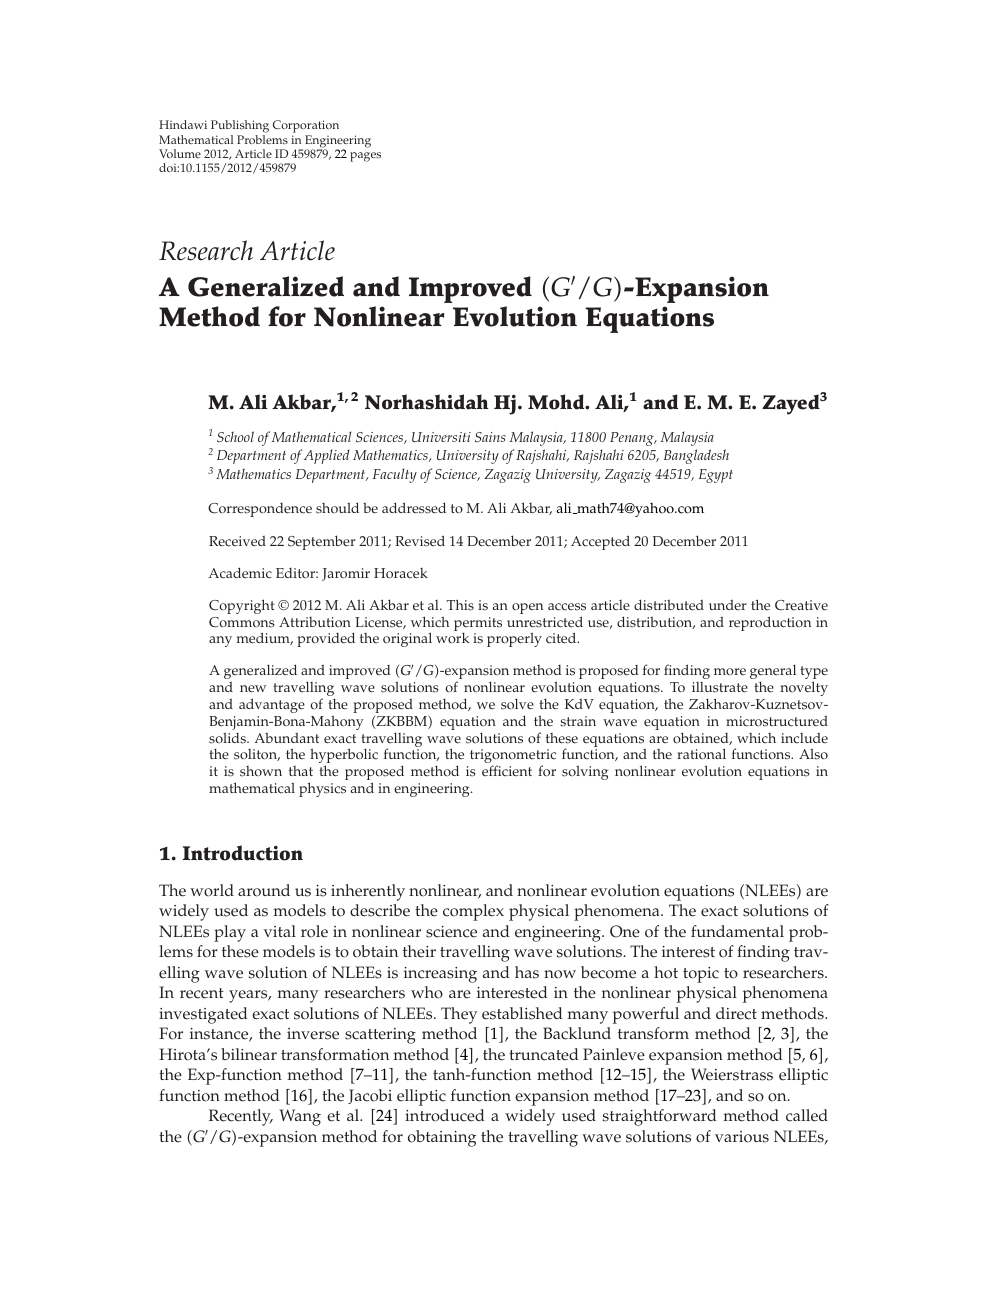 A Generalized And Improved G G Expansion Method For Nonlinear Evolution Equations Topic Of Research Paper In Mathematics Download Scholarly Article Pdf And Read For Free On Cyberleninka Open Science Hub